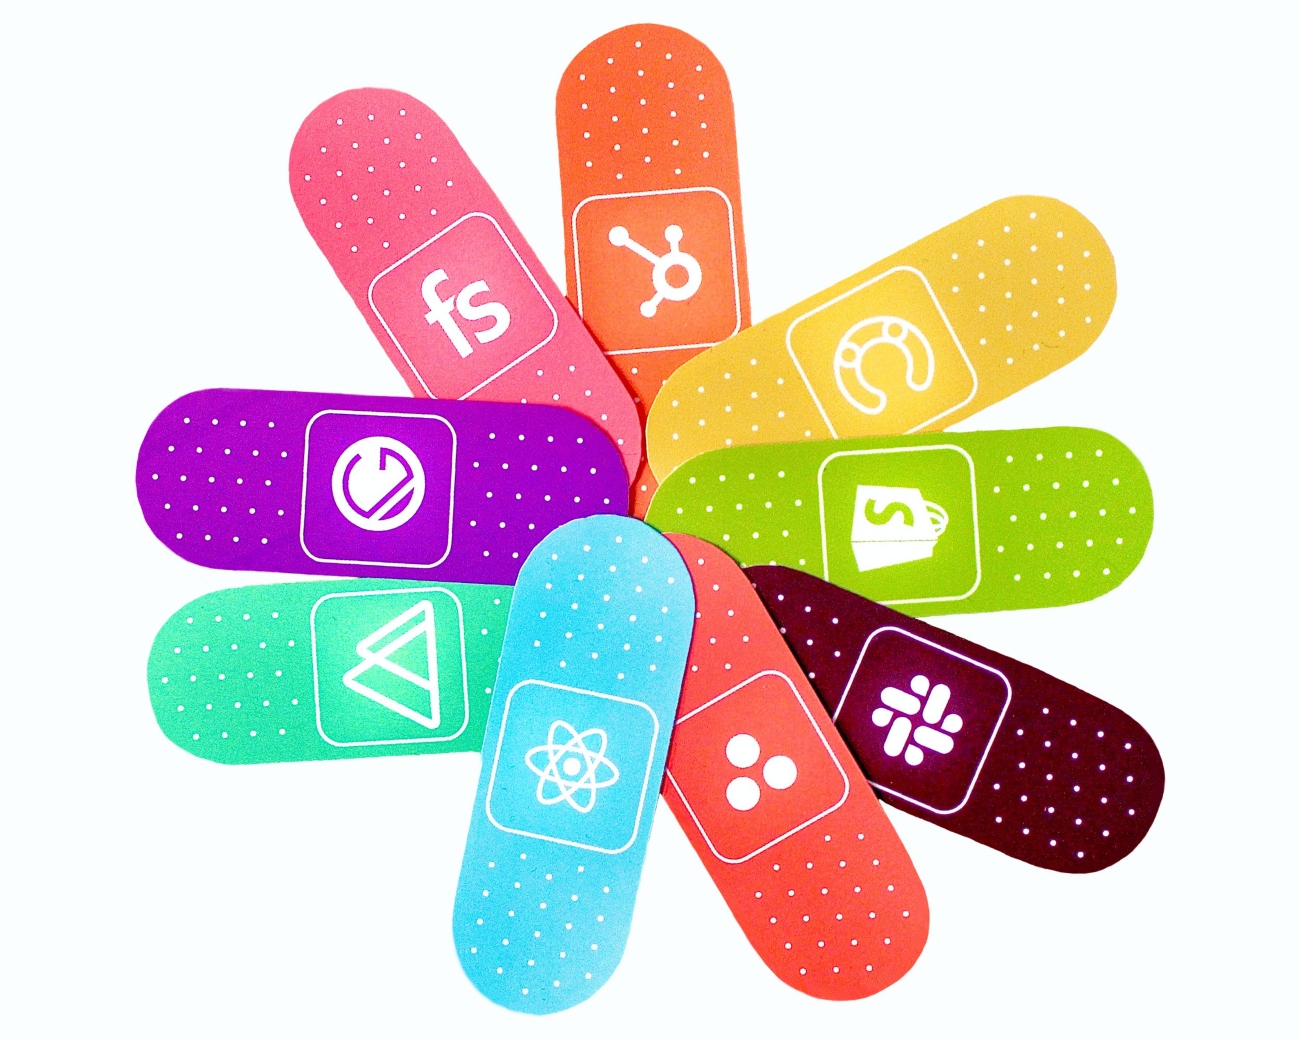 hubspot icons on plasters